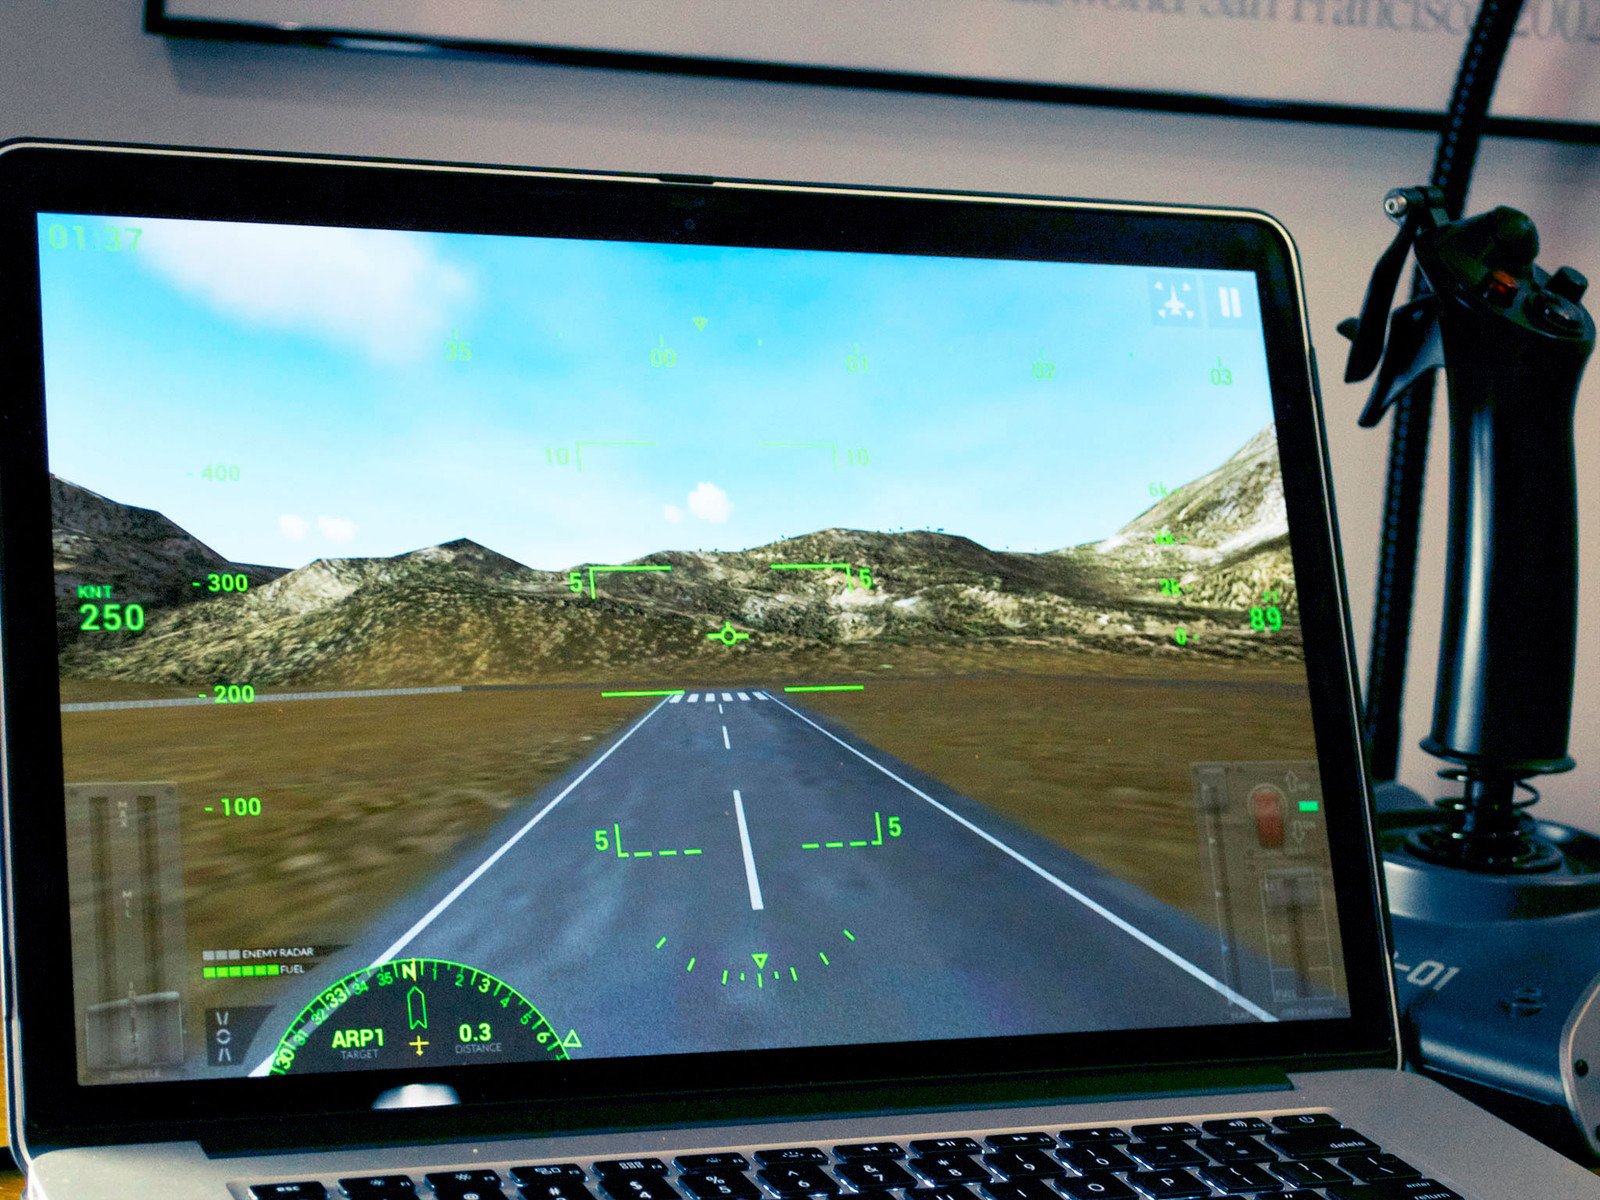 helicopter simulator for mac